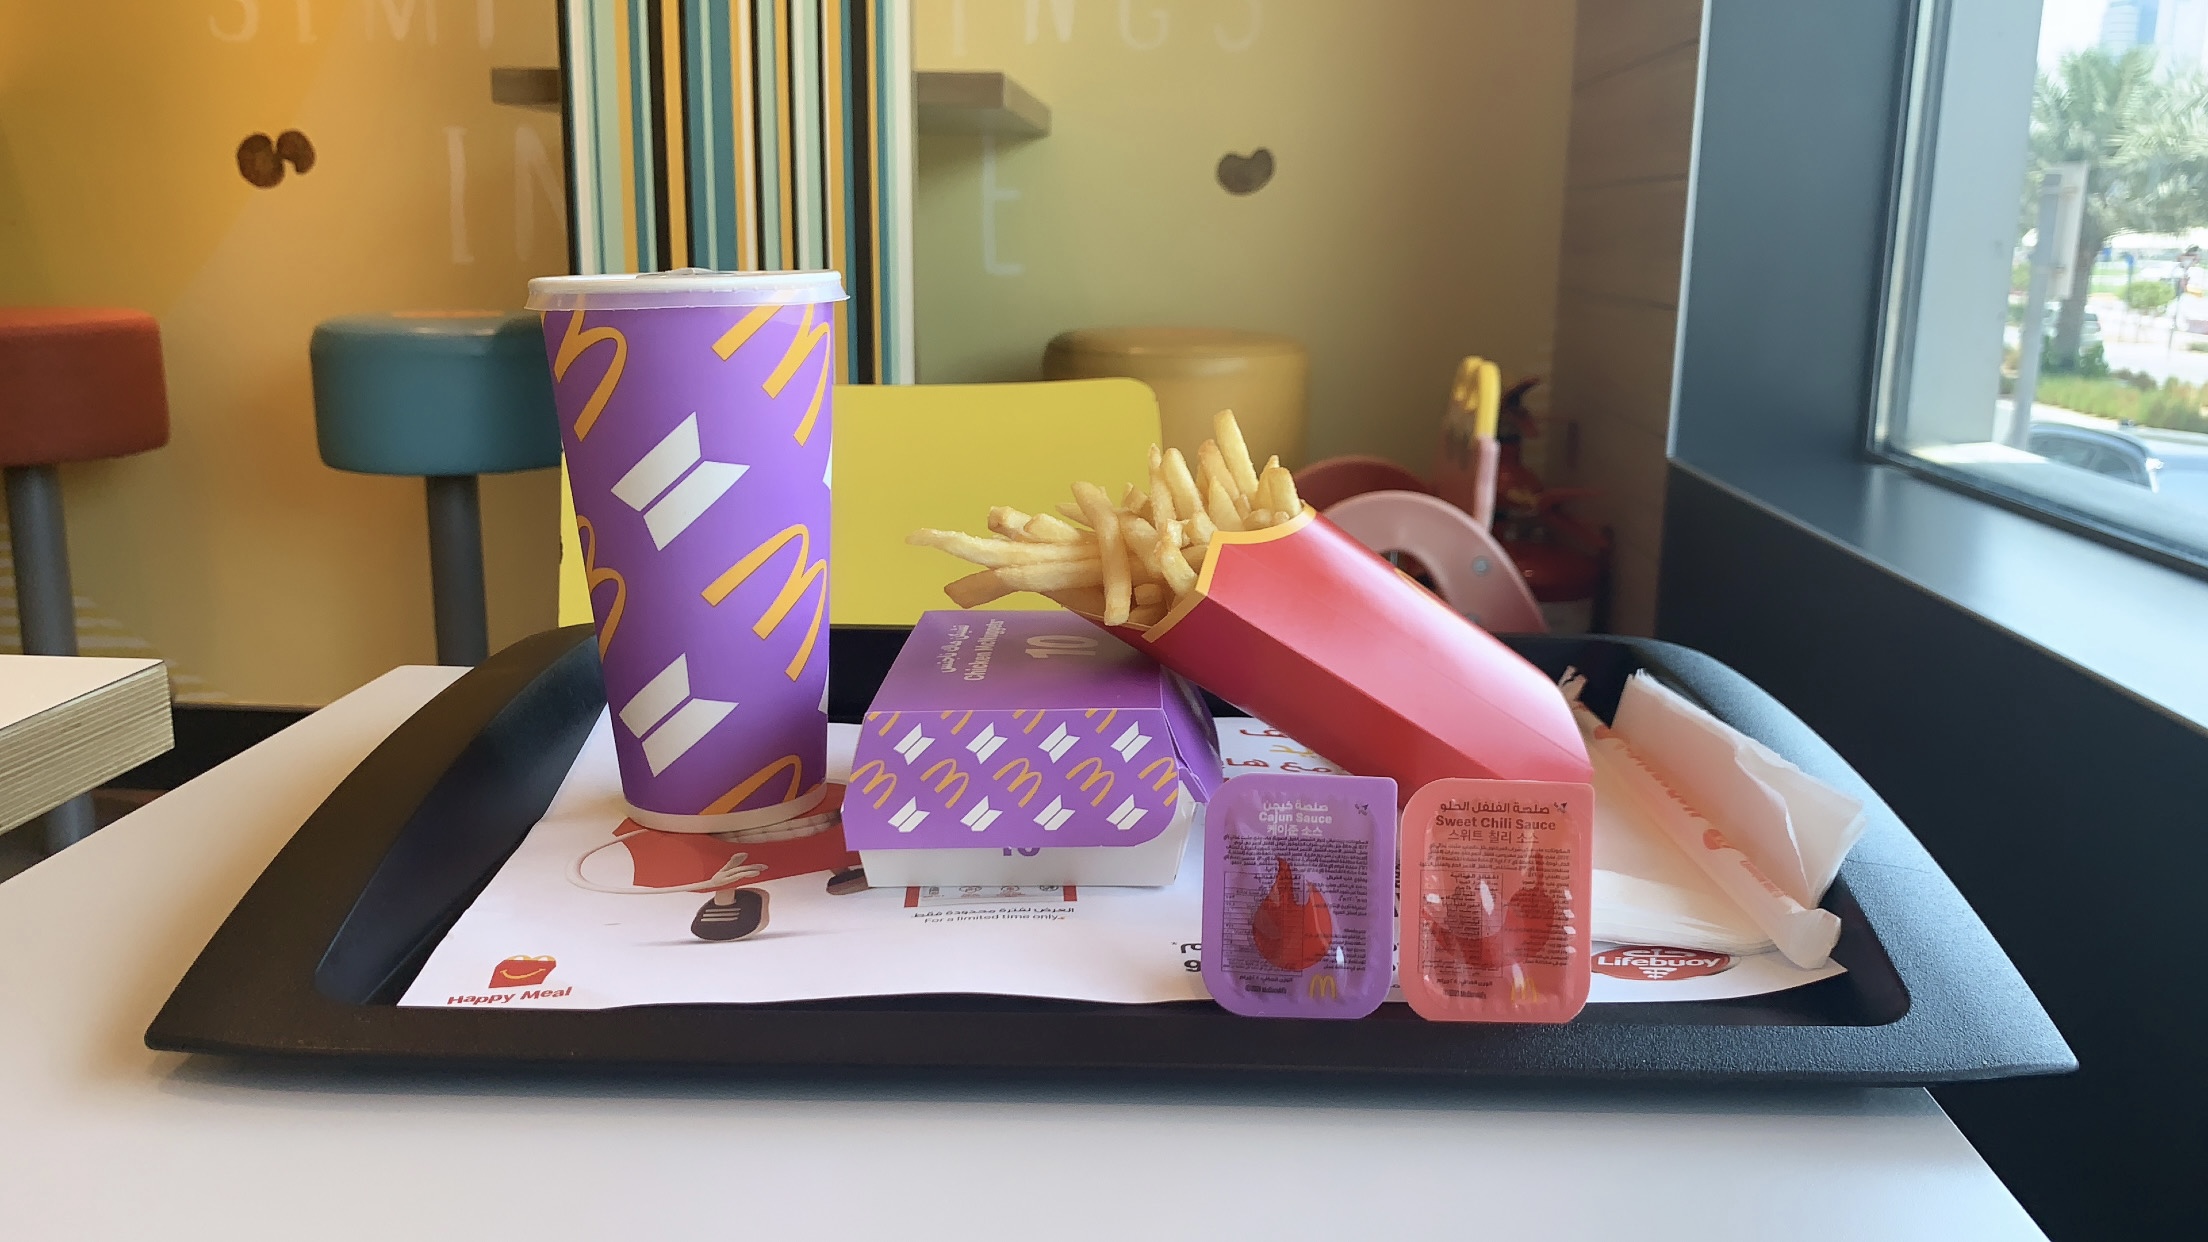 The BTS Meal launches at McDonald's in the UAE tomorrow - Esquire Middle East